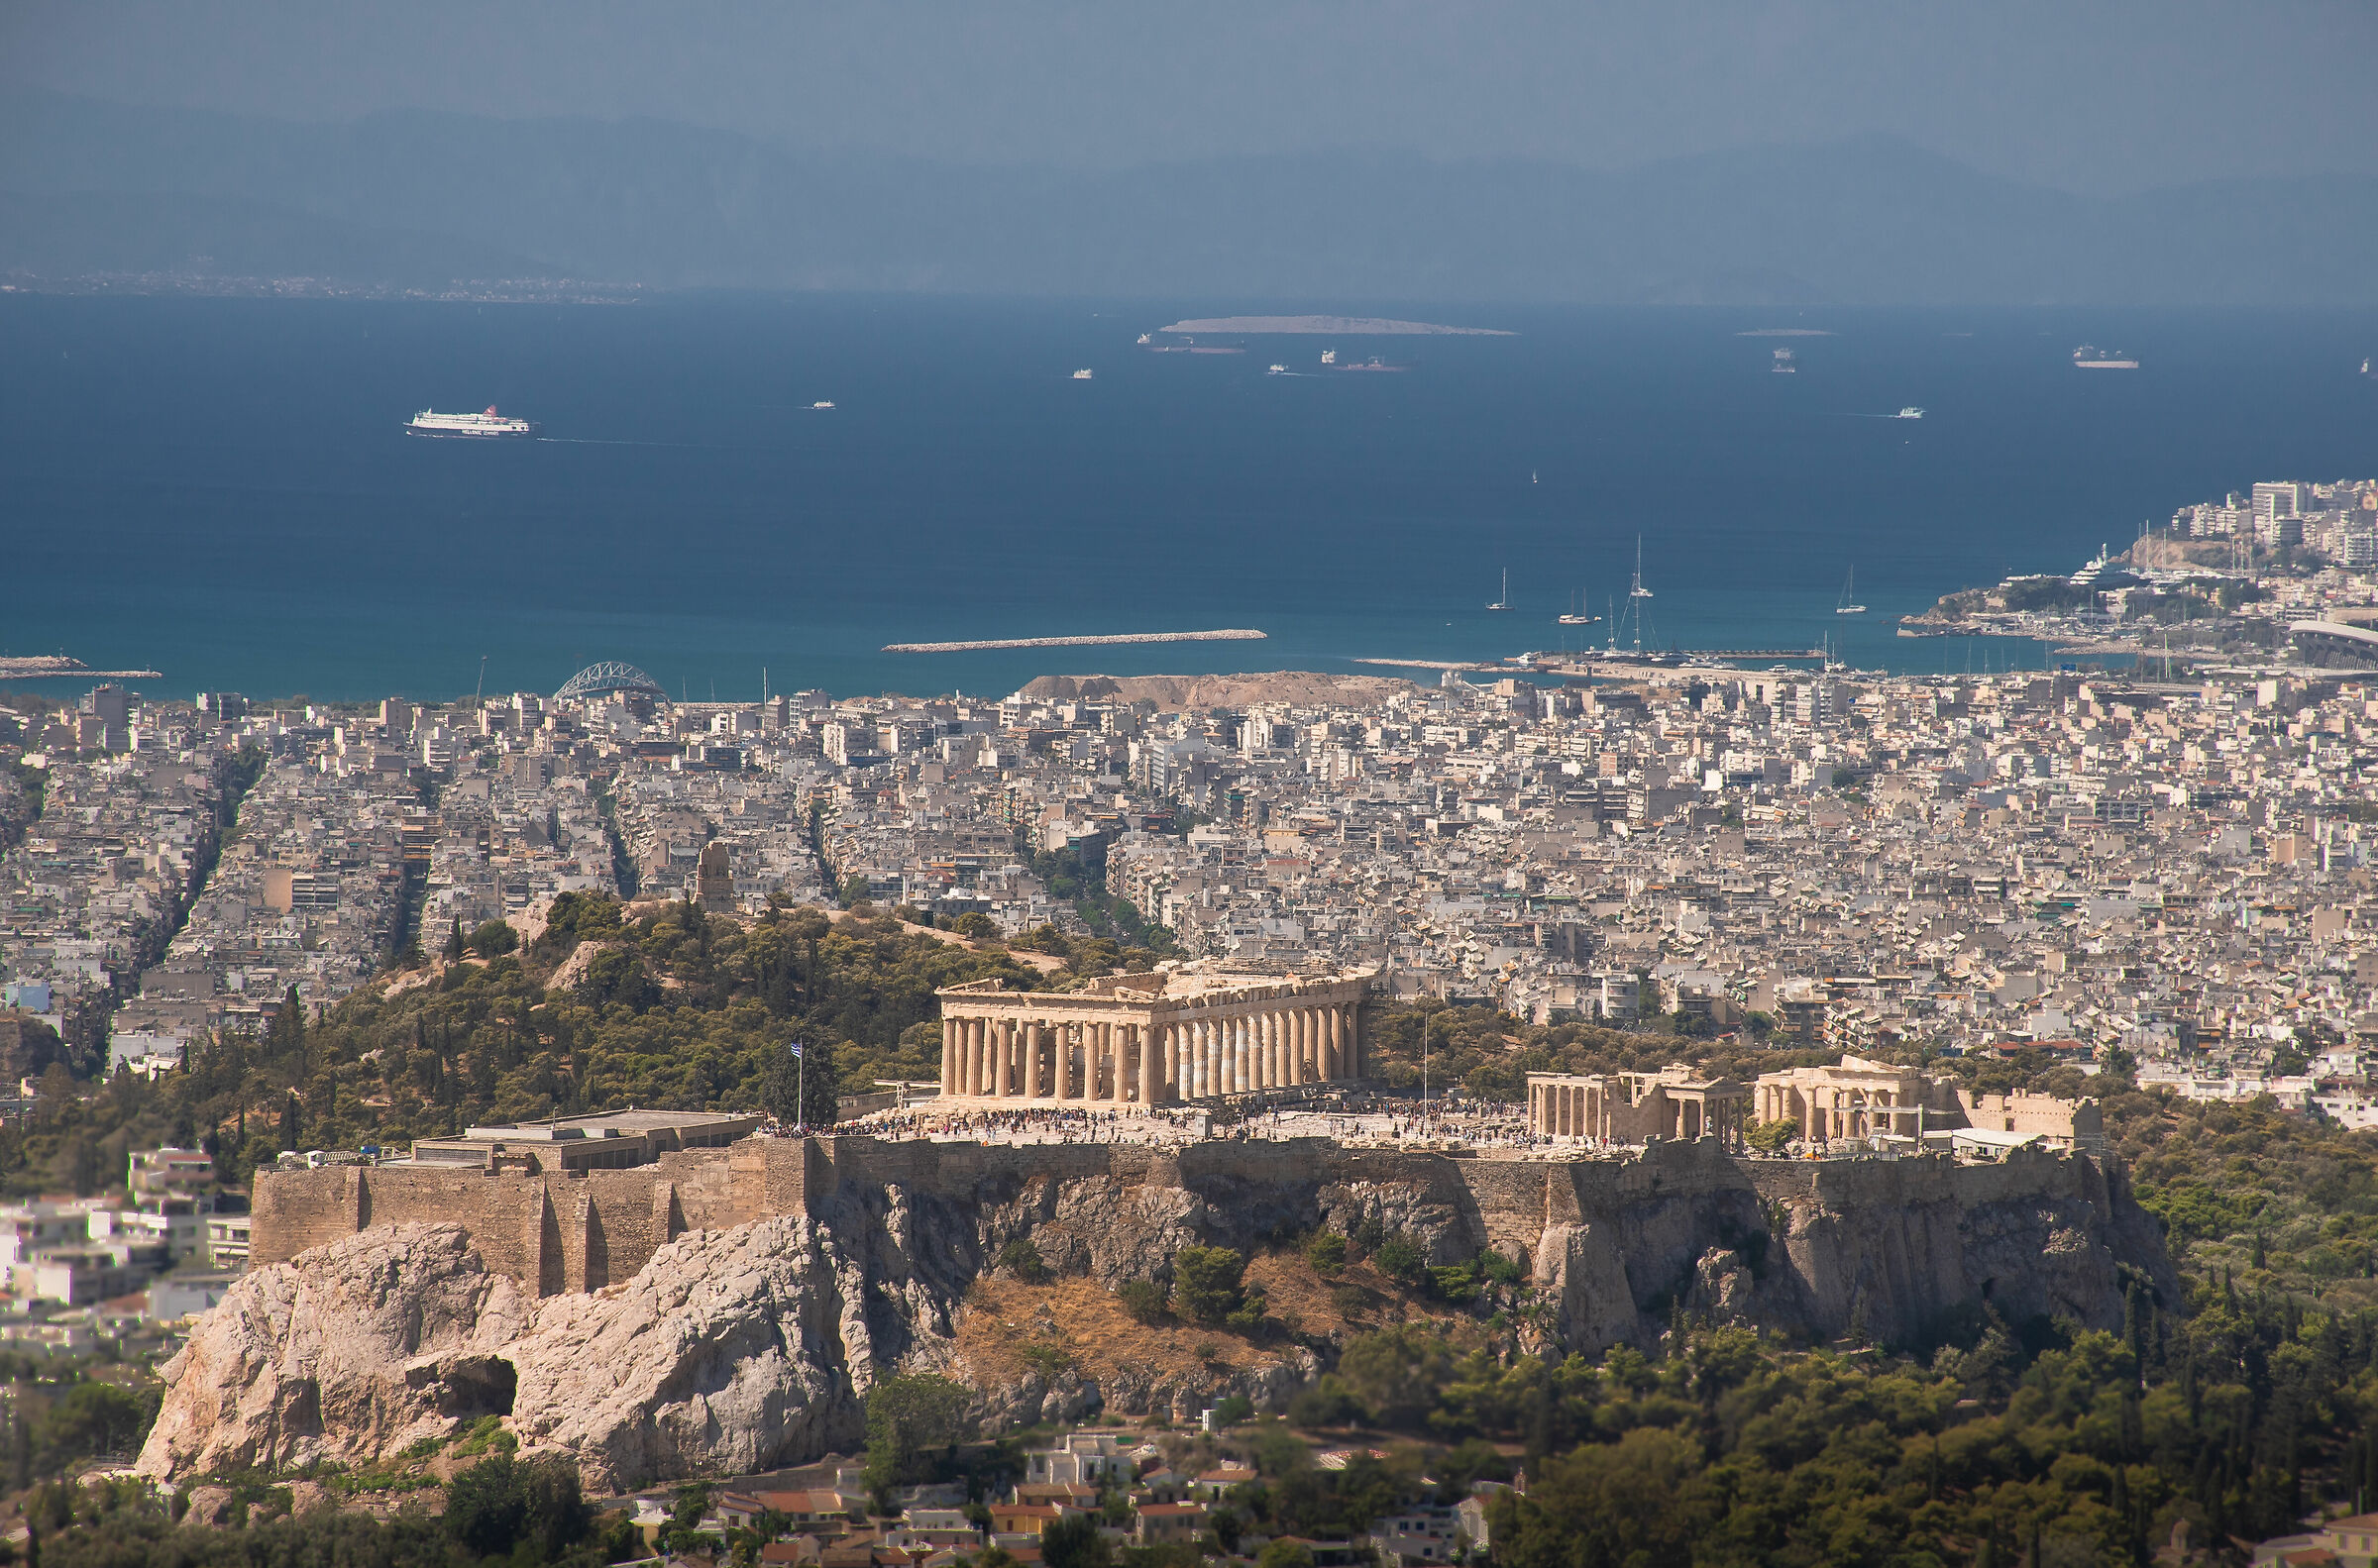 The acropolis and the sea...